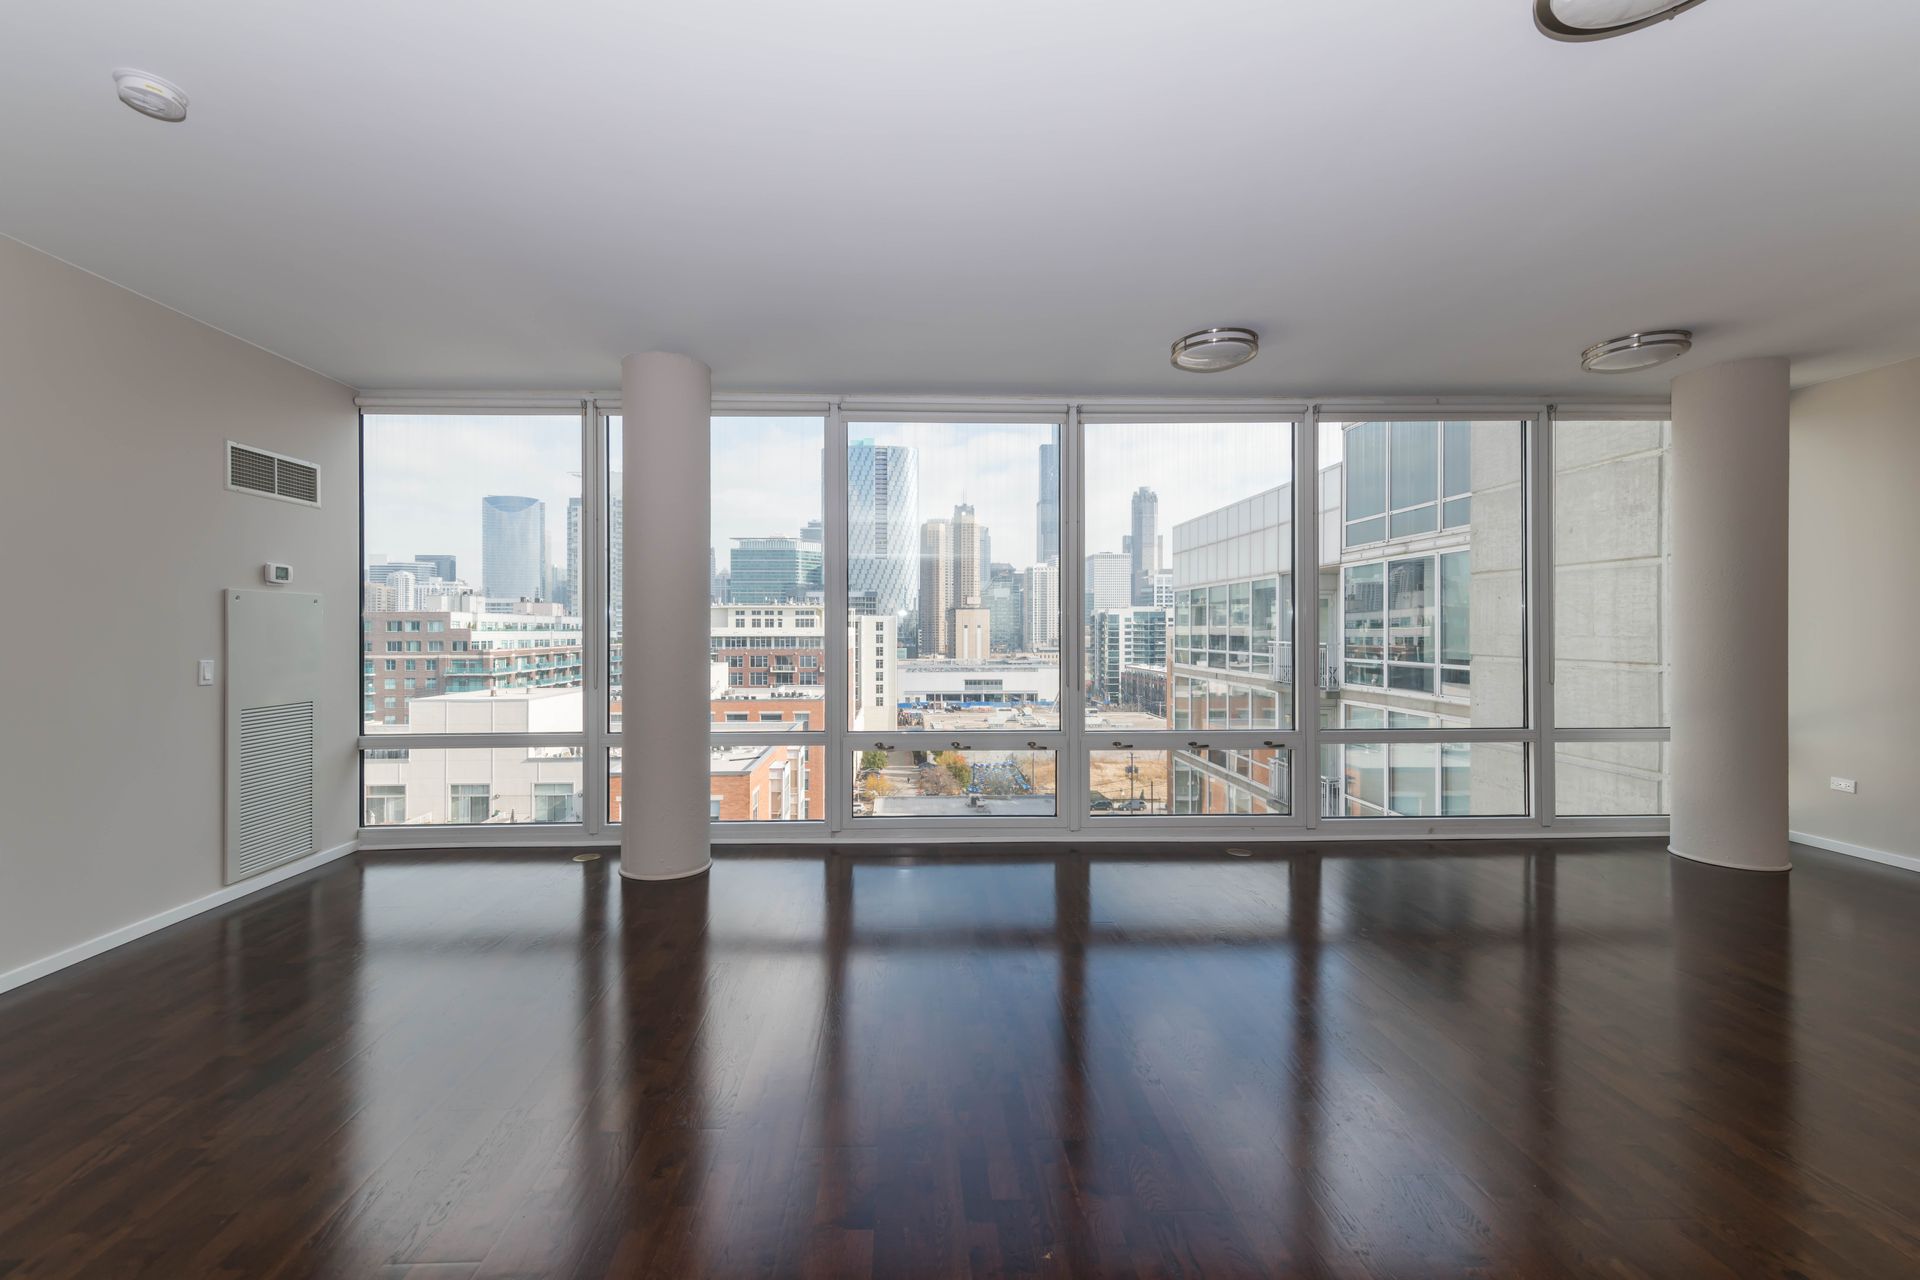 A large empty room with a view of a city at 24 S Morgan Apartments.